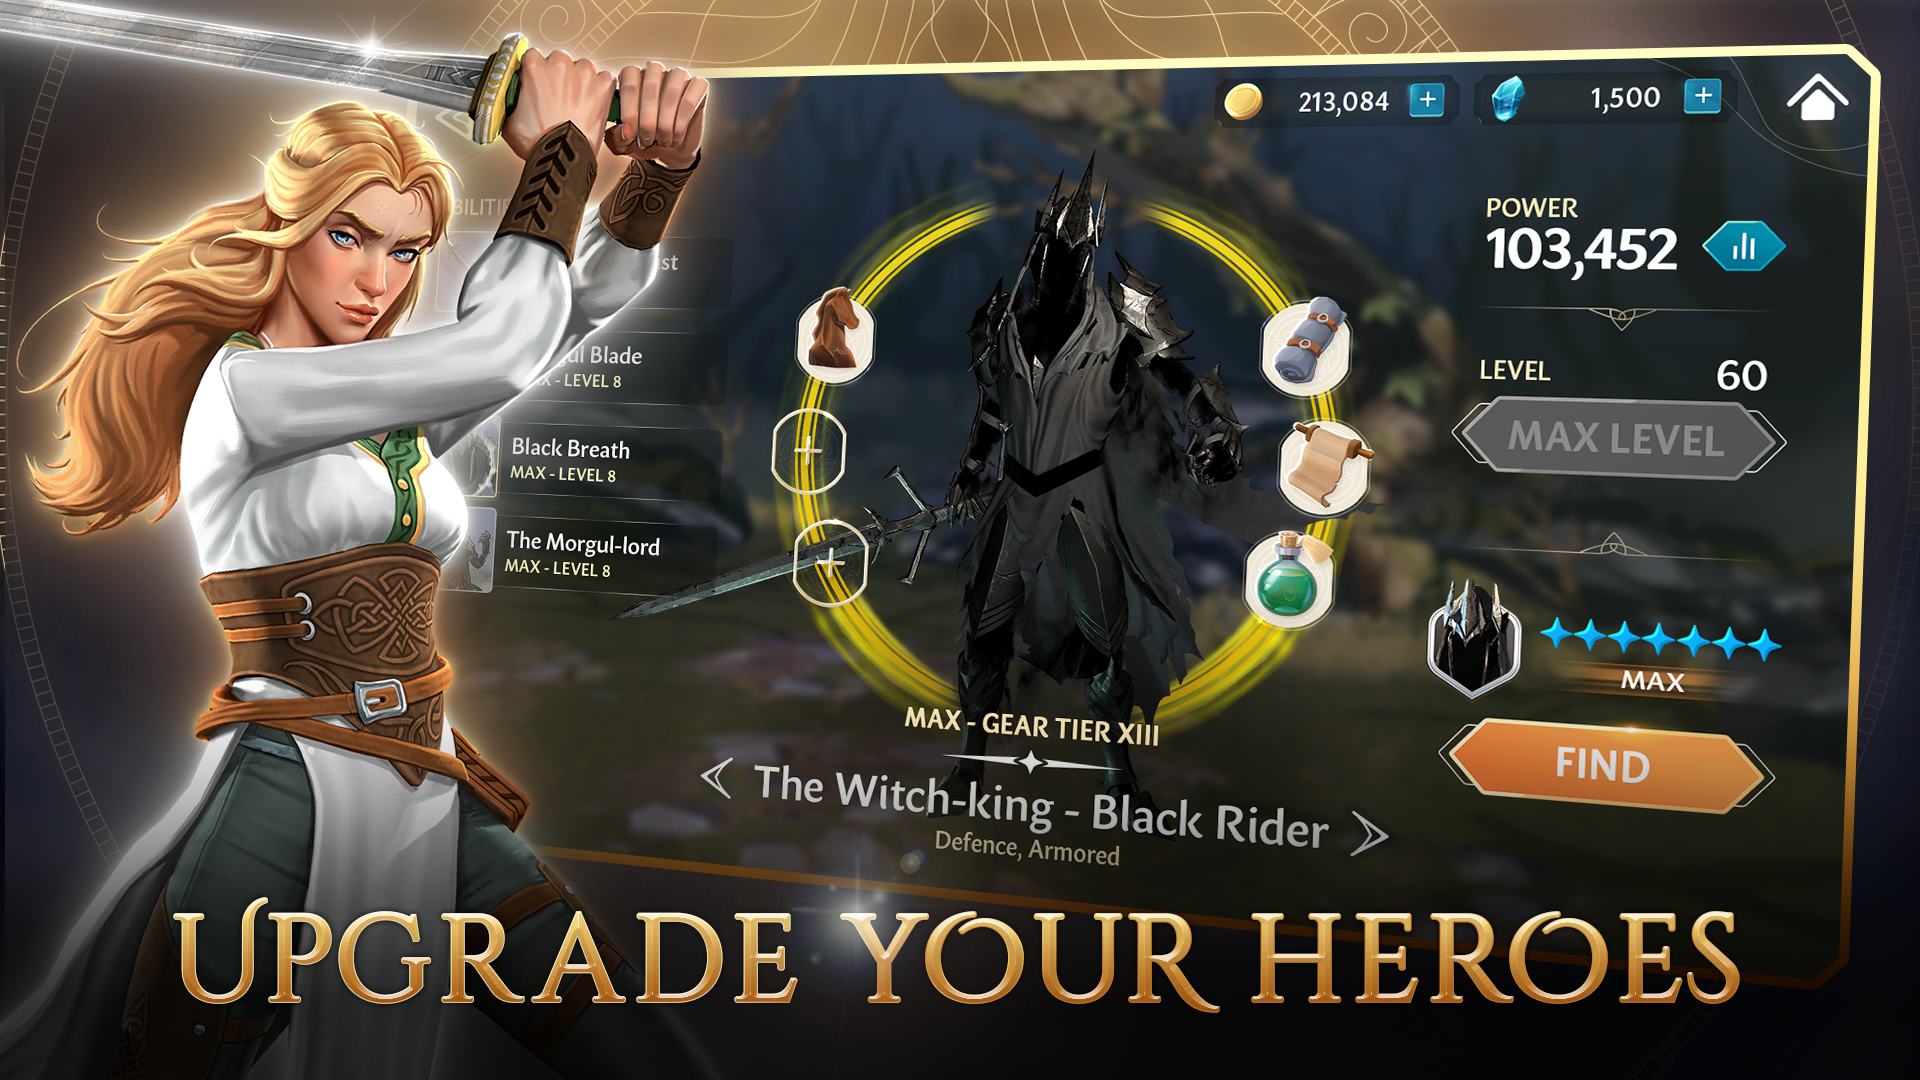 Upgrading your heroes in Heroes of Middle-earth